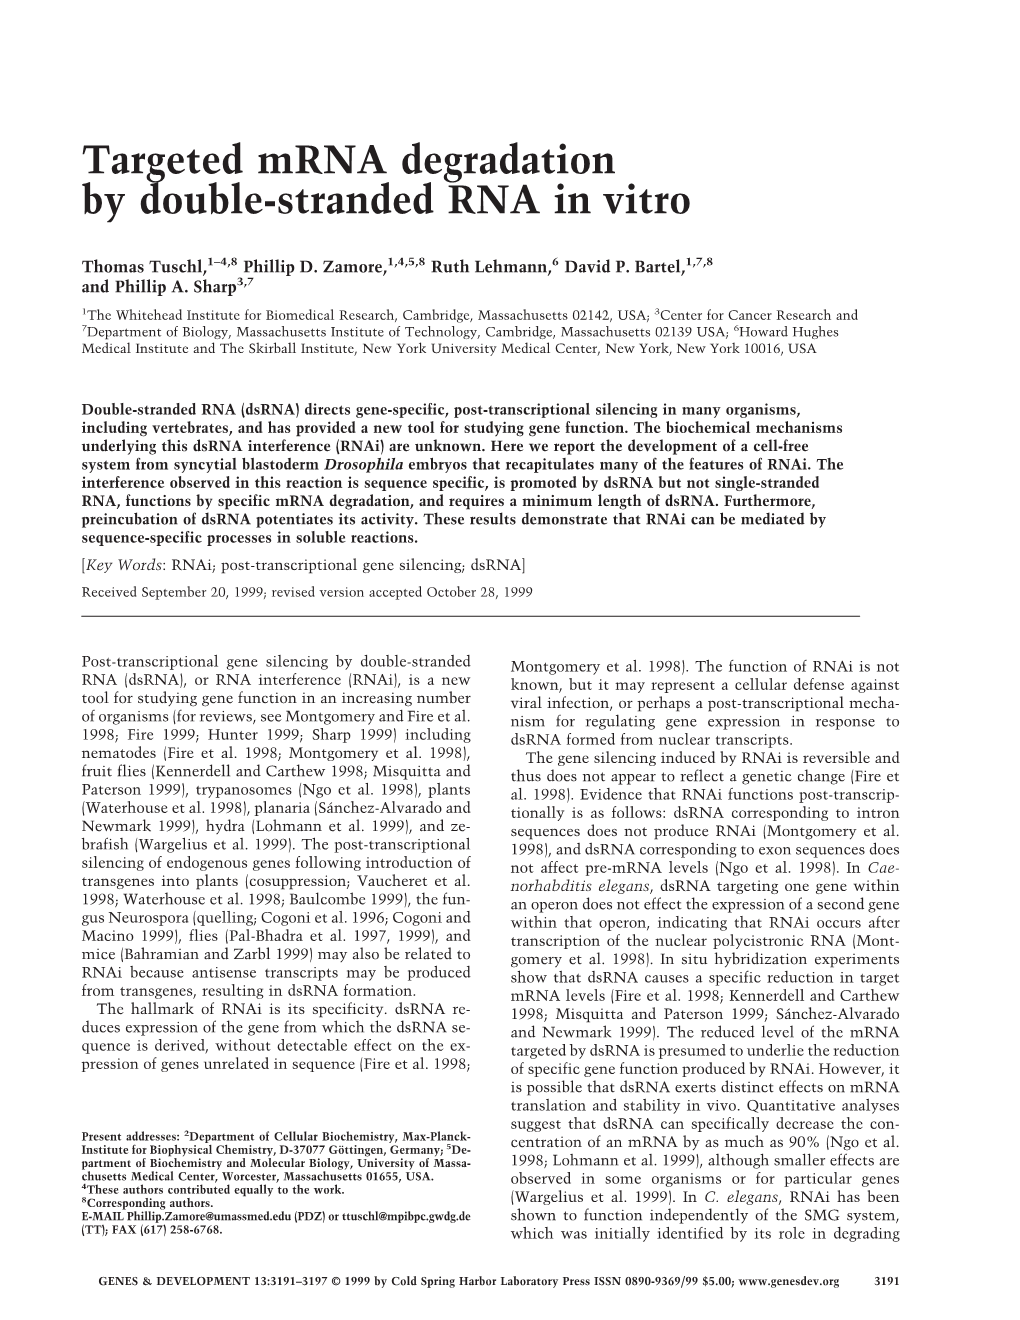 Targeted Mrna Degradation by Double-Stranded RNA in Vitro